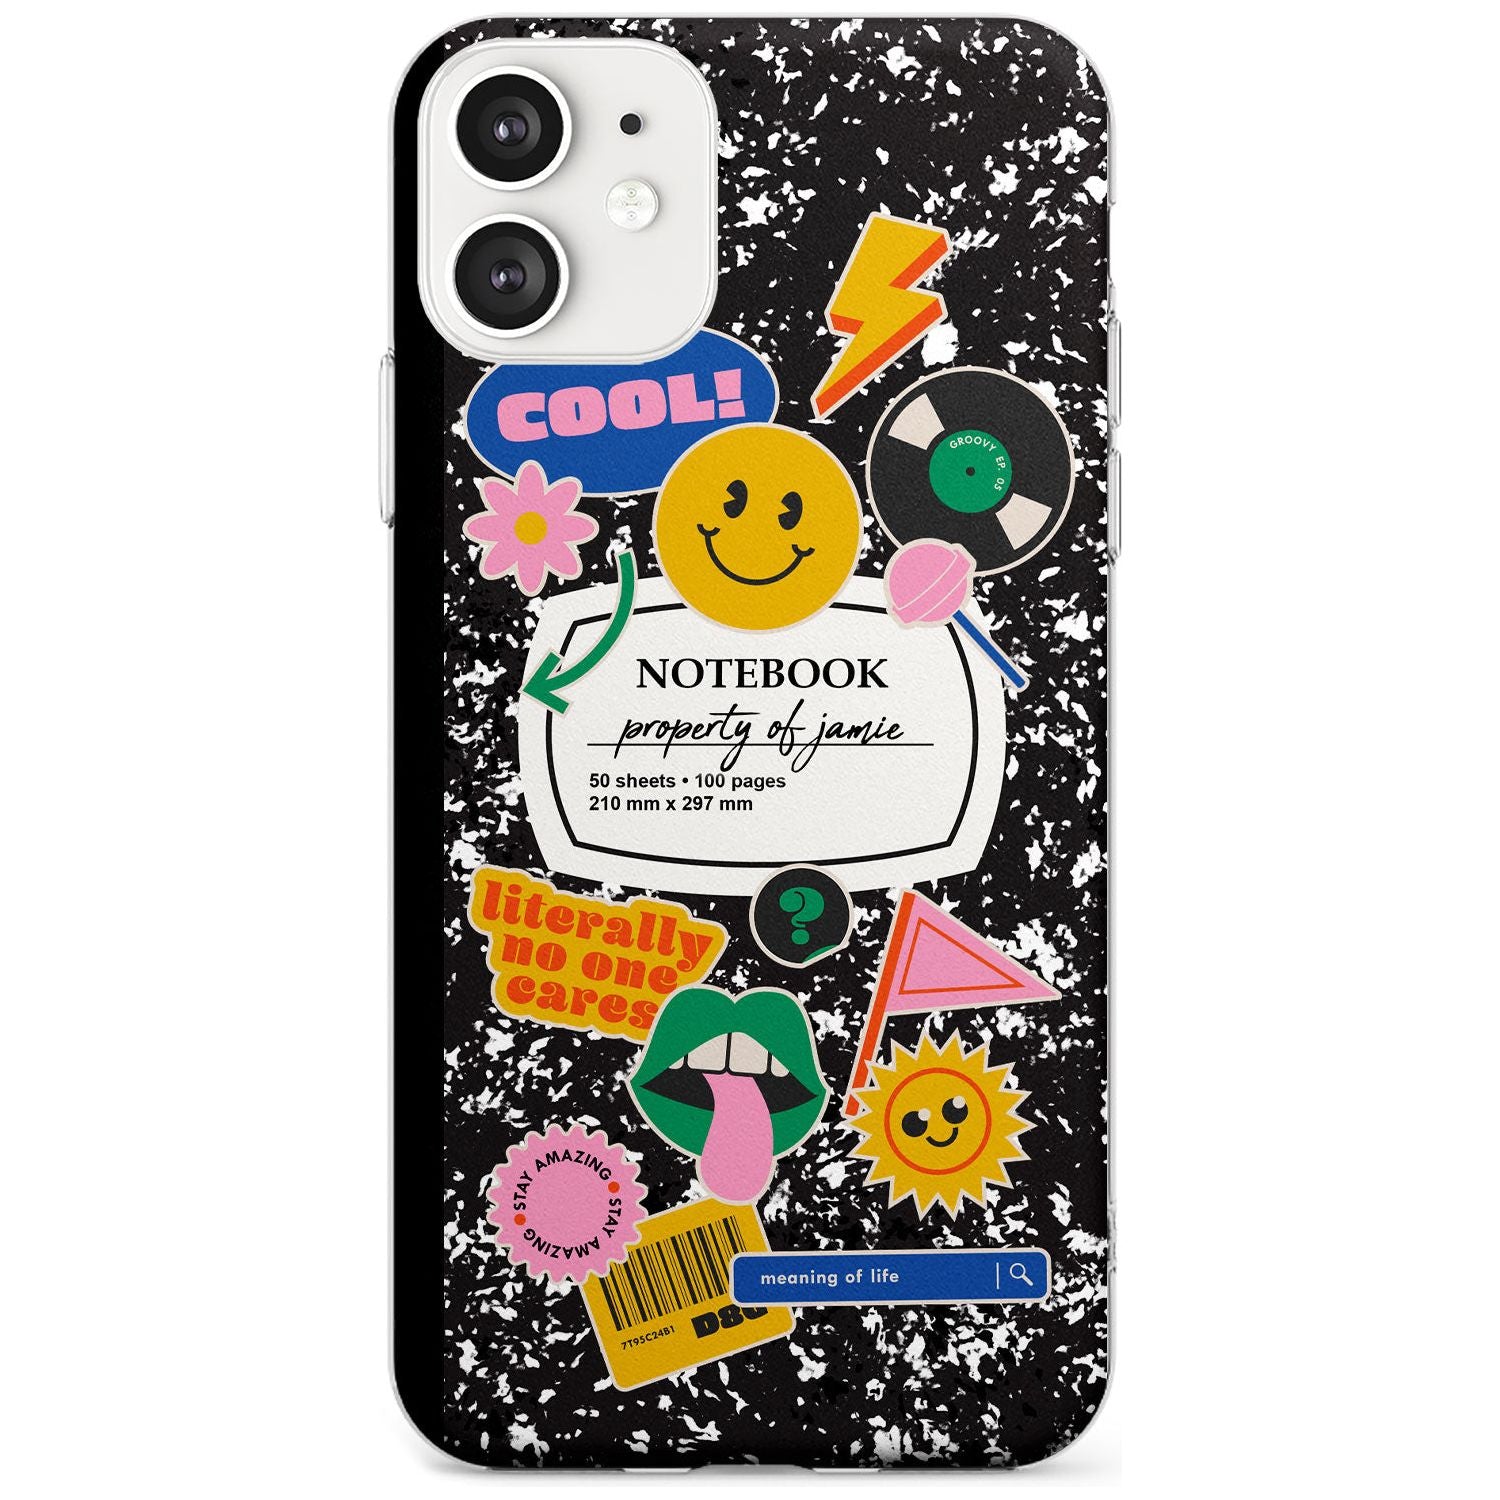 Custom Notebook Cover with Stickers Black Impact Phone Case for iPhone 11